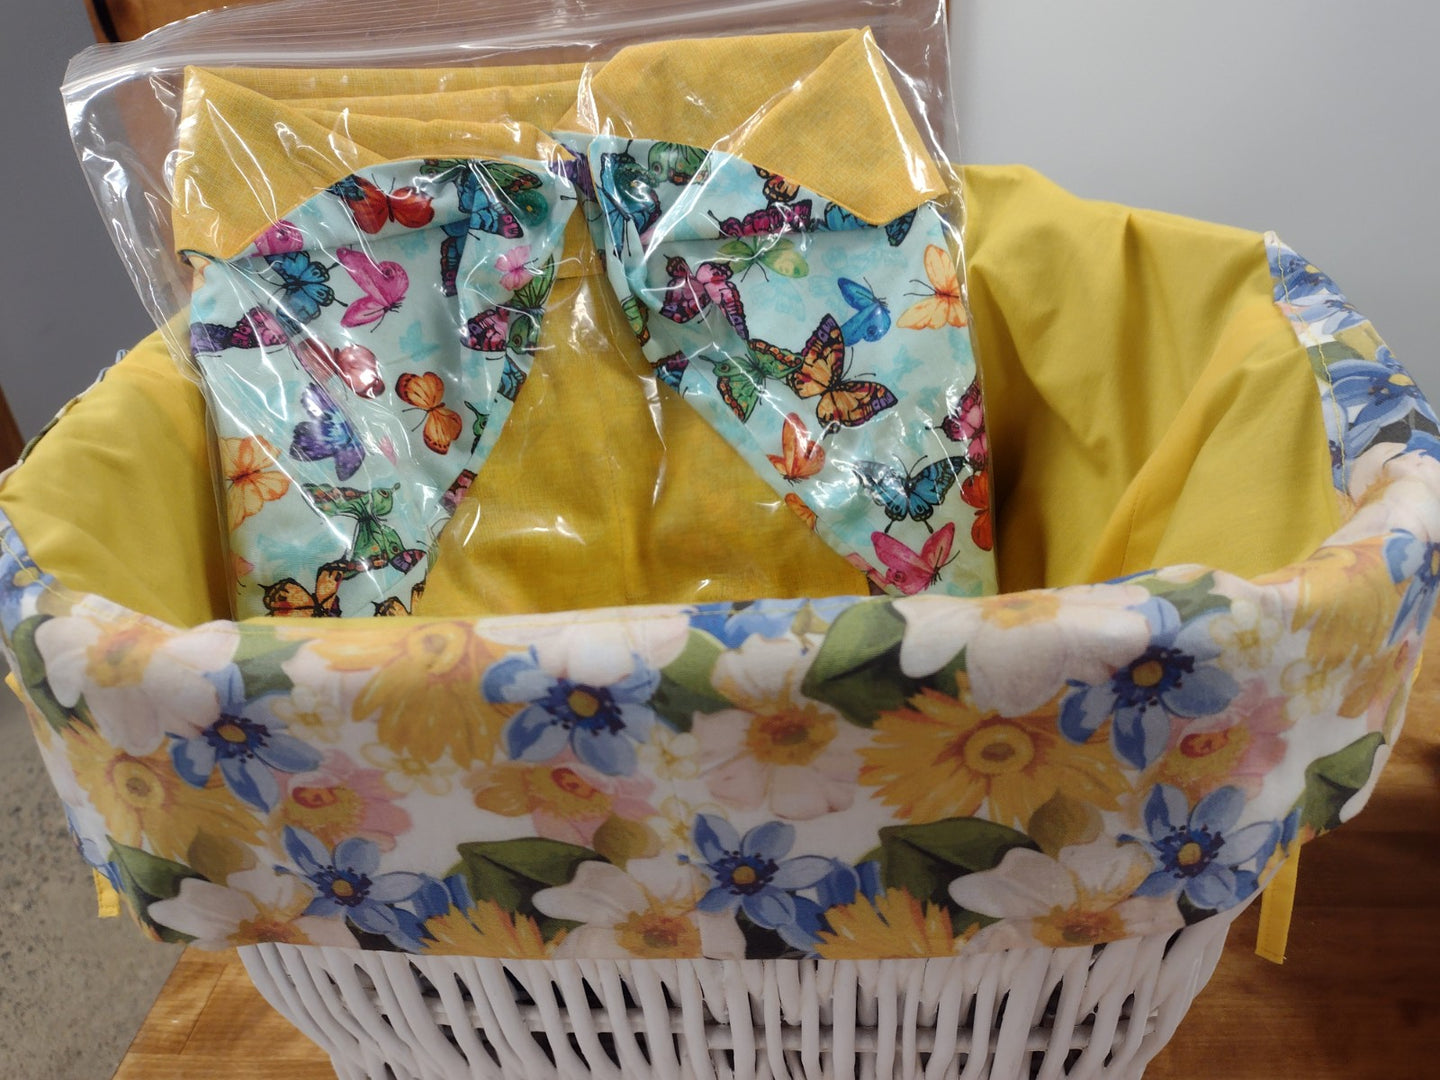 MNKatKraft Basket Liner Group - Butterfly and Flower Themed Liners